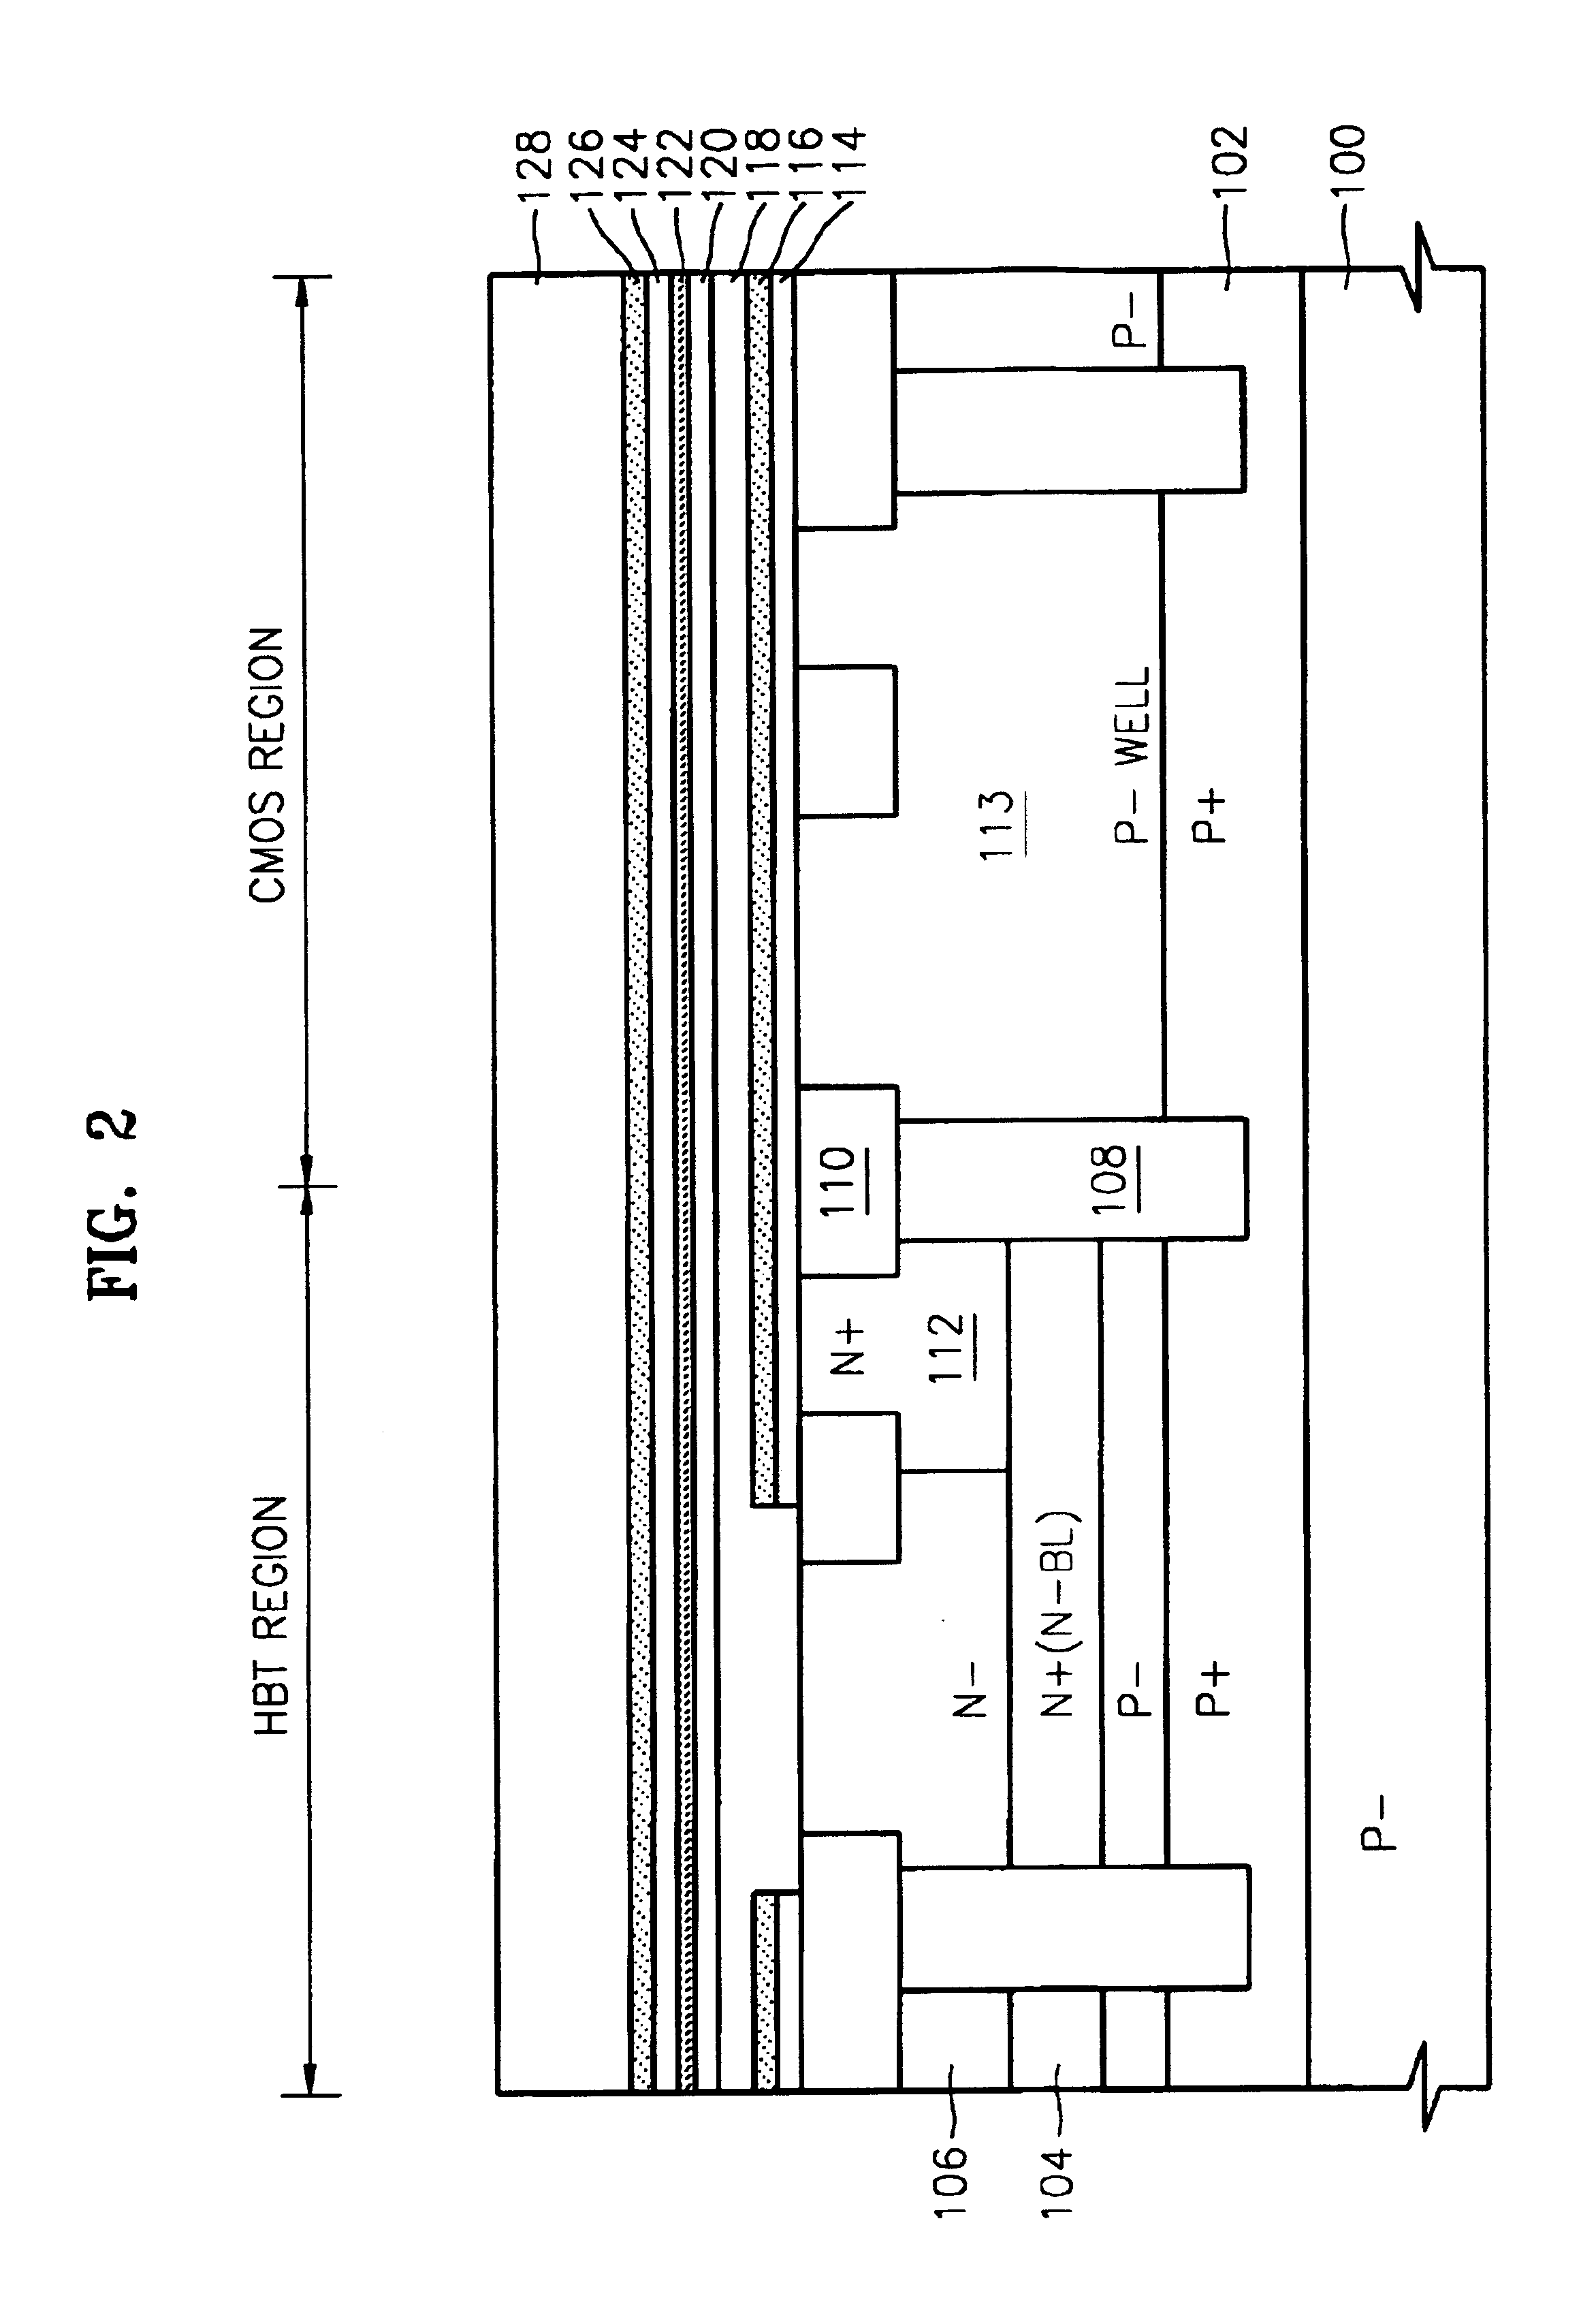 Method for manufacturing self-aligned BiCMOS